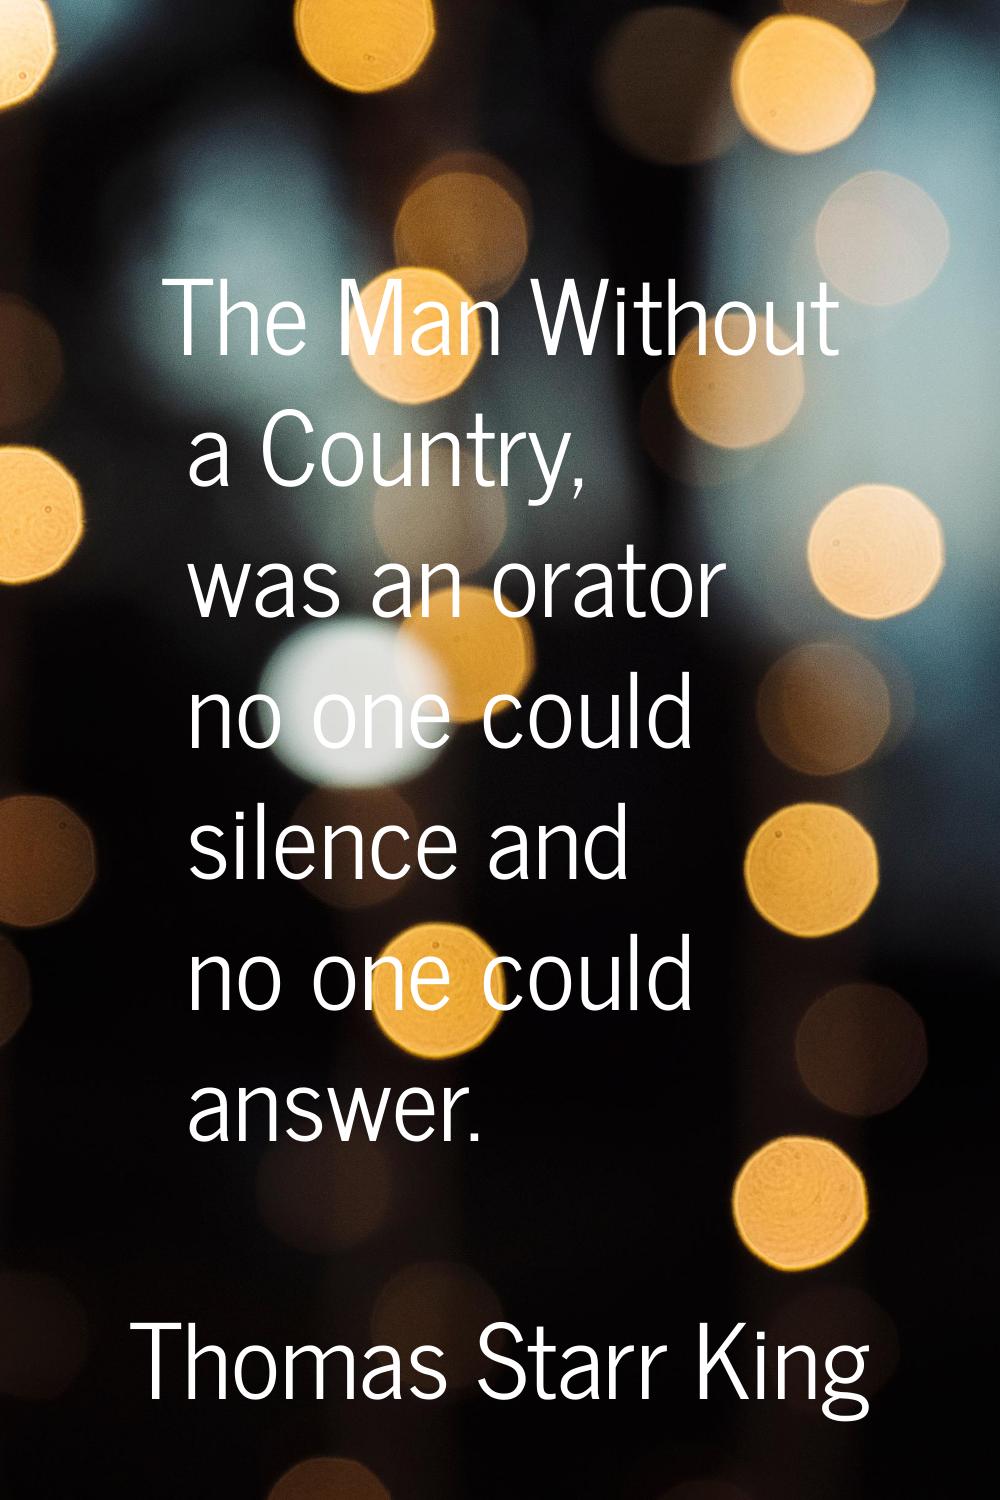 The Man Without a Country, was an orator no one could silence and no one could answer.